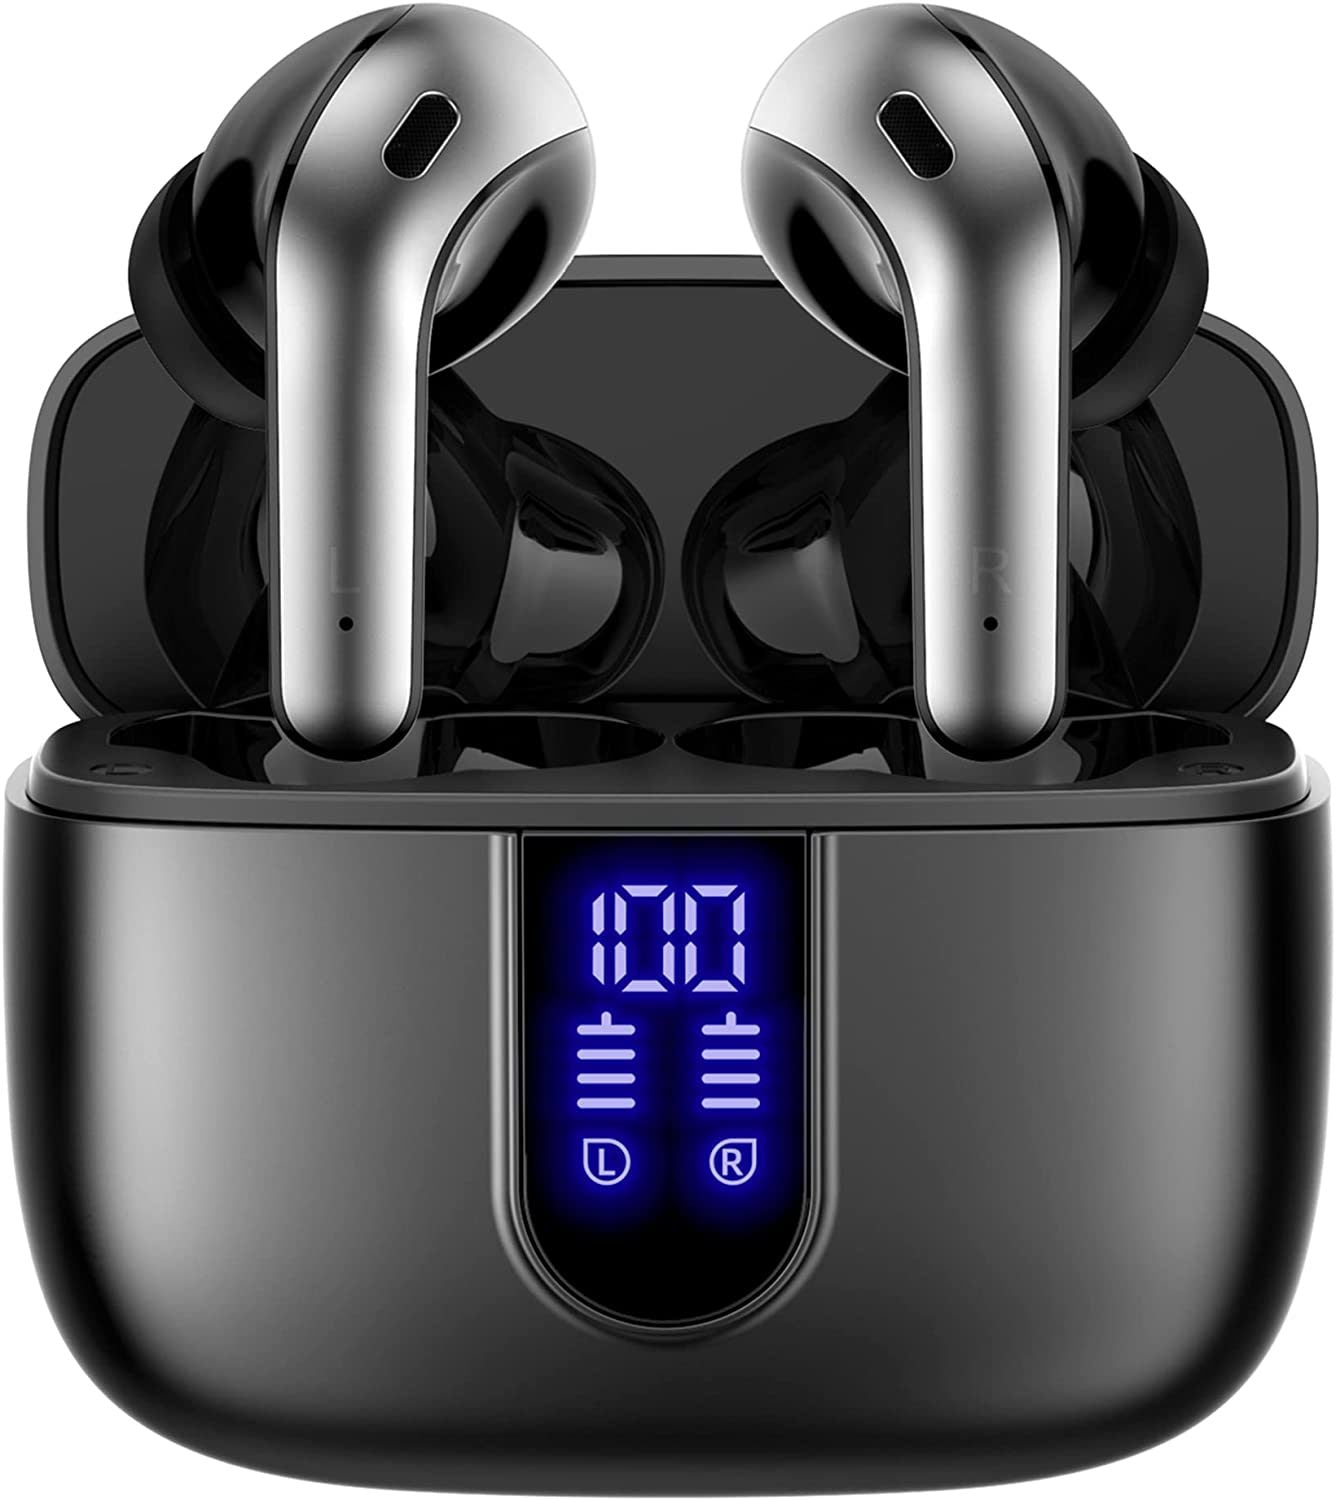 Bluetooth Headphones True Wireless Earbuds LED Power Display Earphones with Wireless Charging Case IPX5 Waterproof in-Ear Earbuds with Mic for TV Smart Phone Computer Laptop Sports